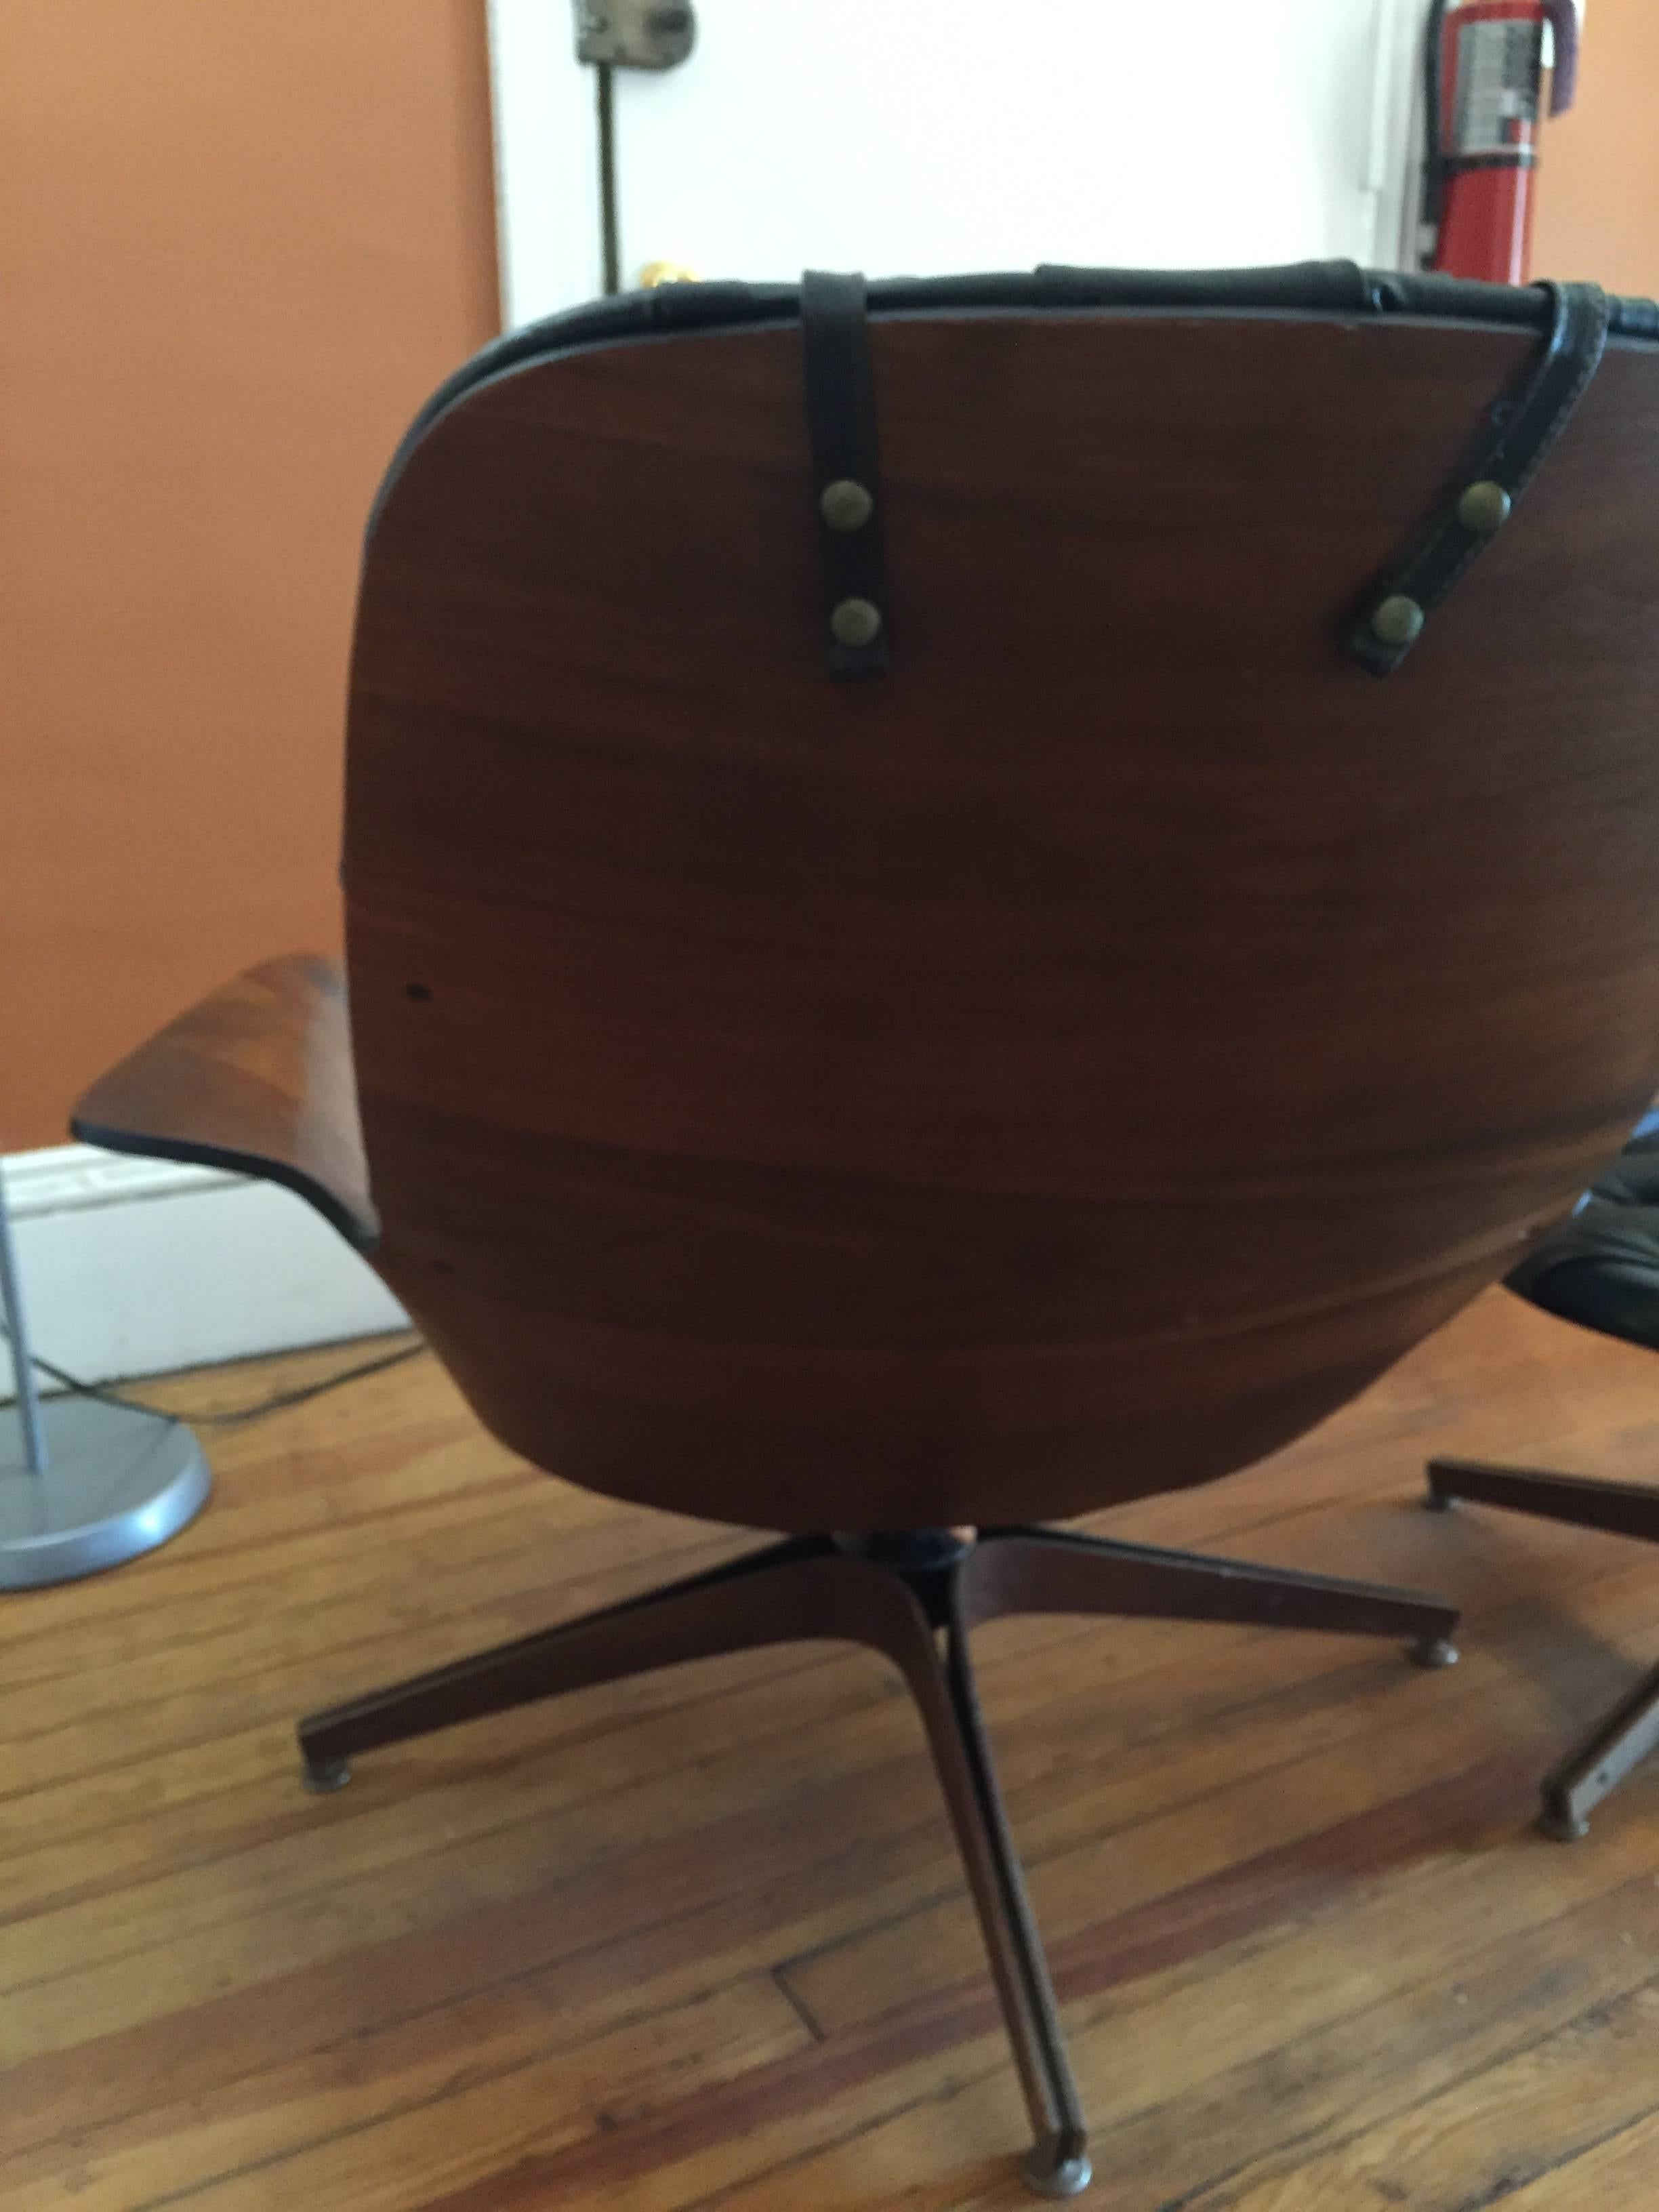 Designed in the 1950s by George Mulhauser of the Plycraft Company, one of the first and the best makers of molded plywood furniture, along with Herman Miller.
Attractive walnut bentwood arms and back.   Black naugahyde upholstery on both chair and